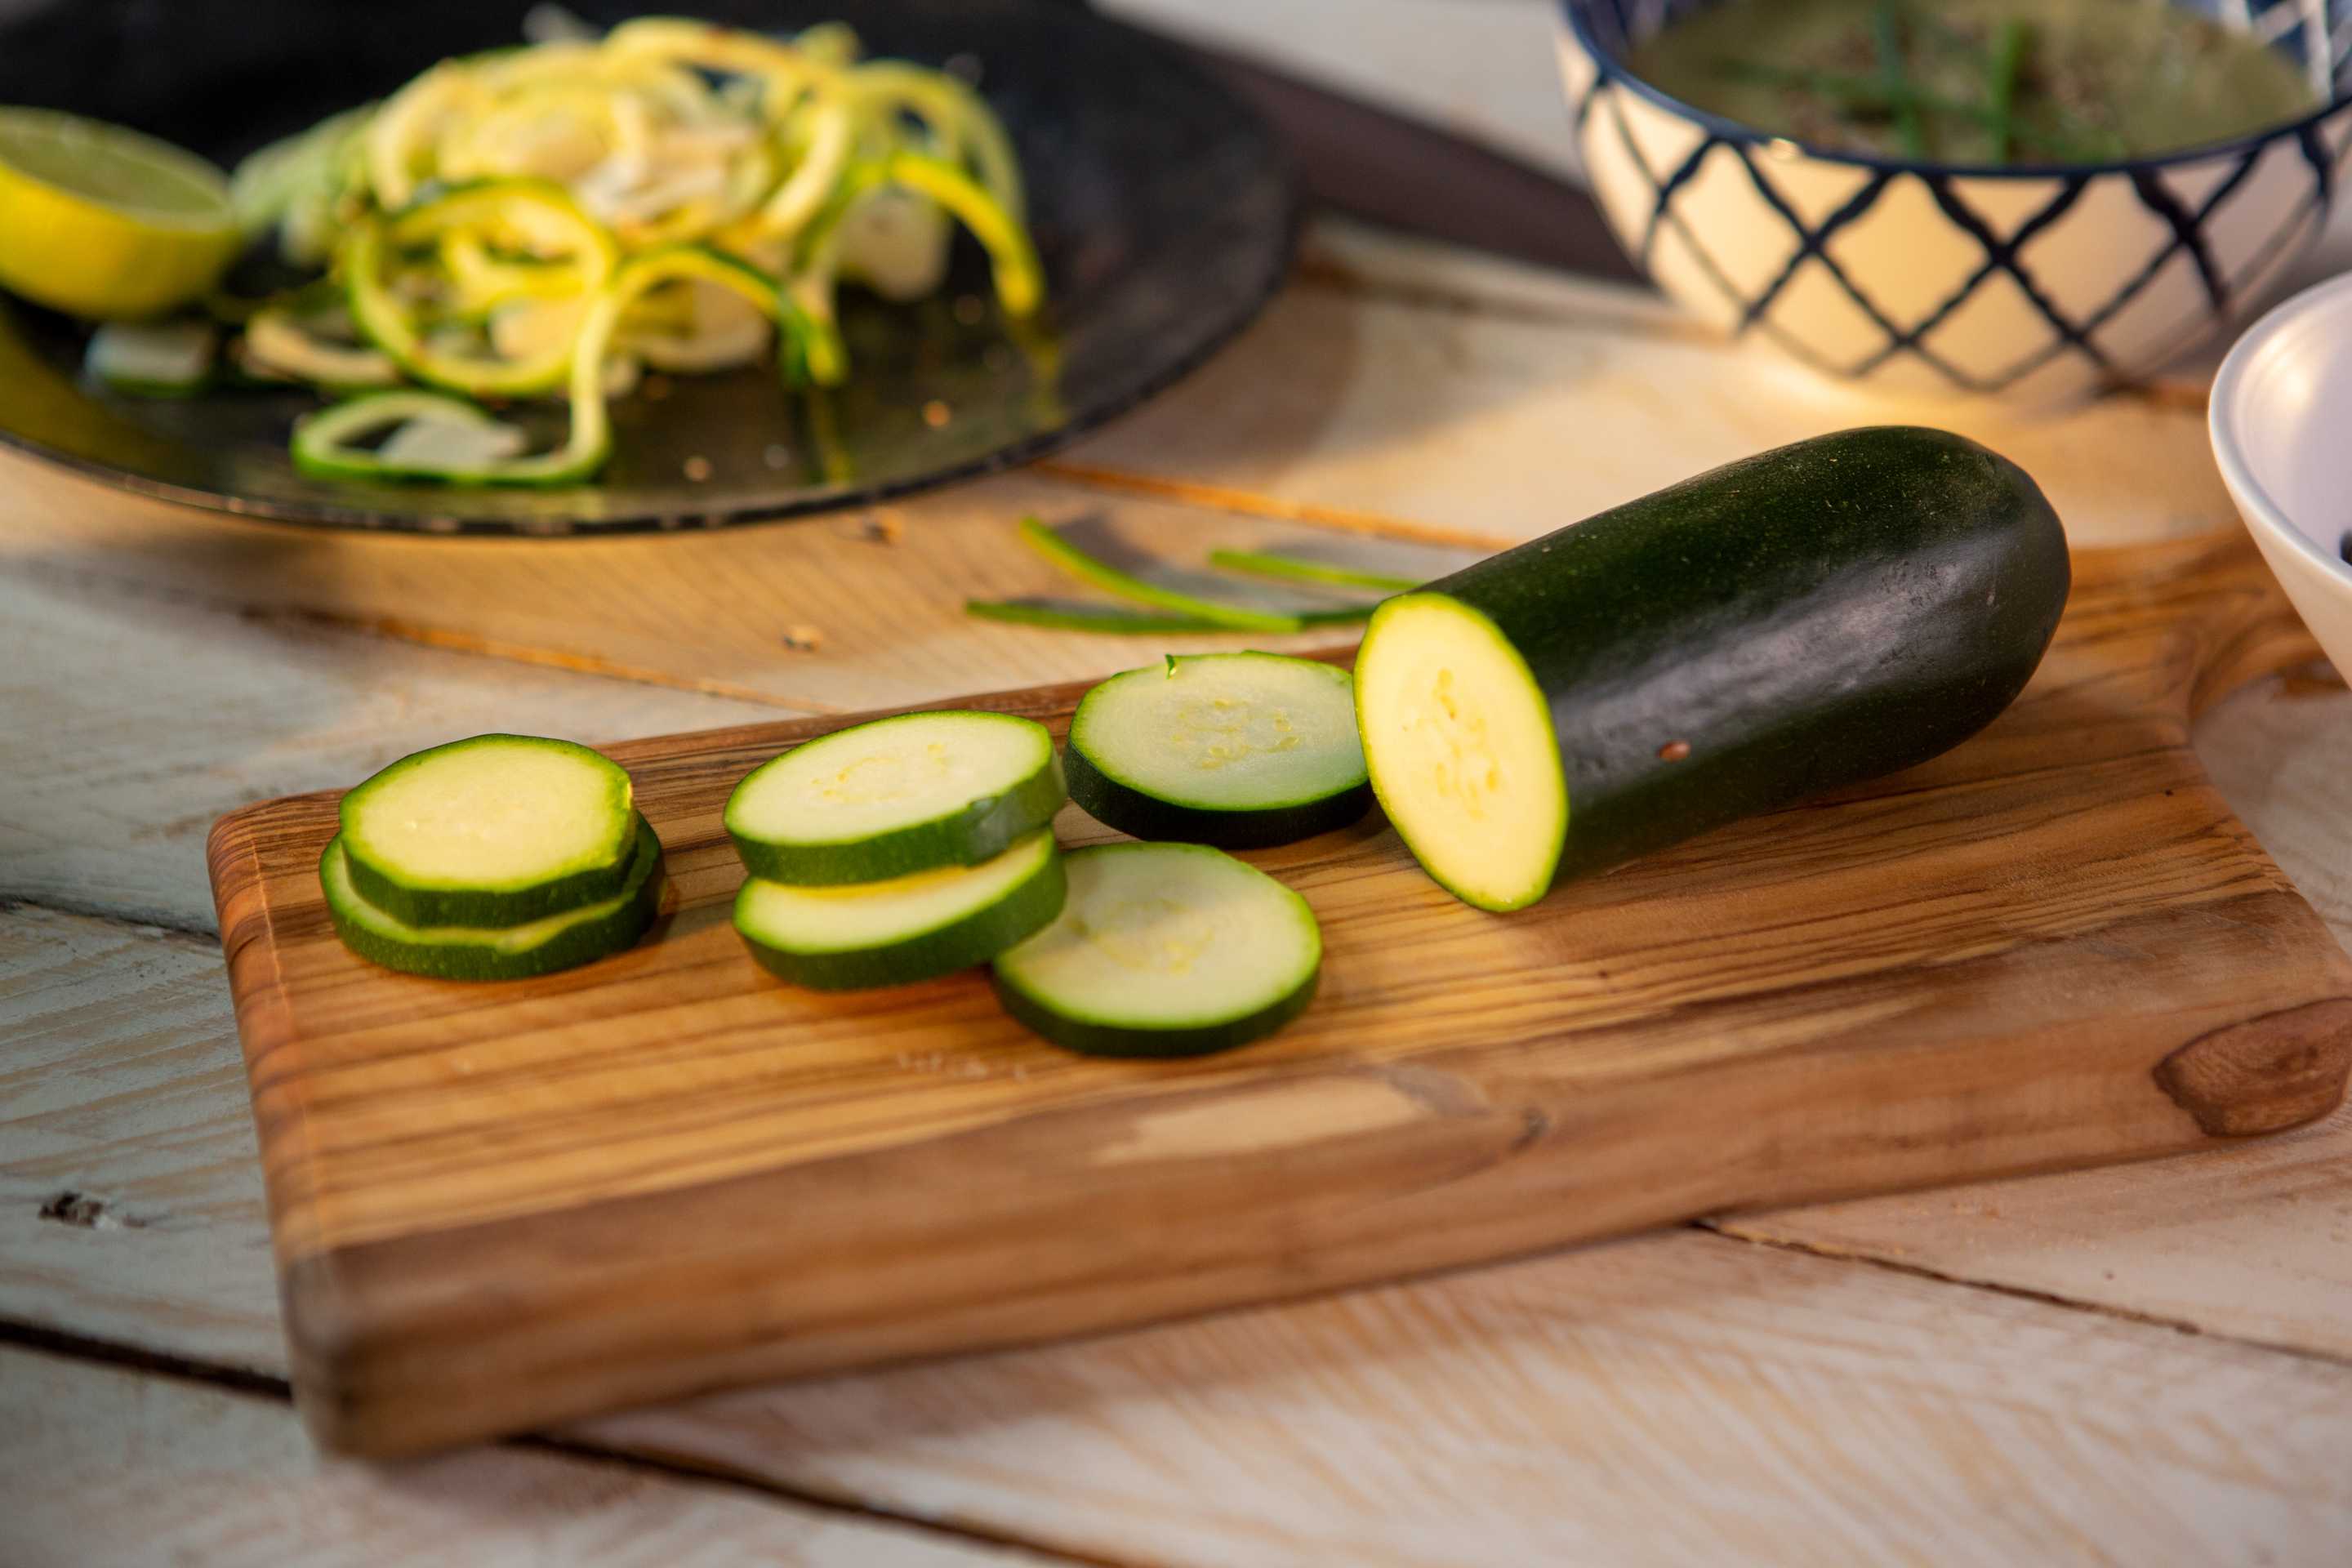 microsoft, professional faqs: is zucchini a good source of probiotic food?